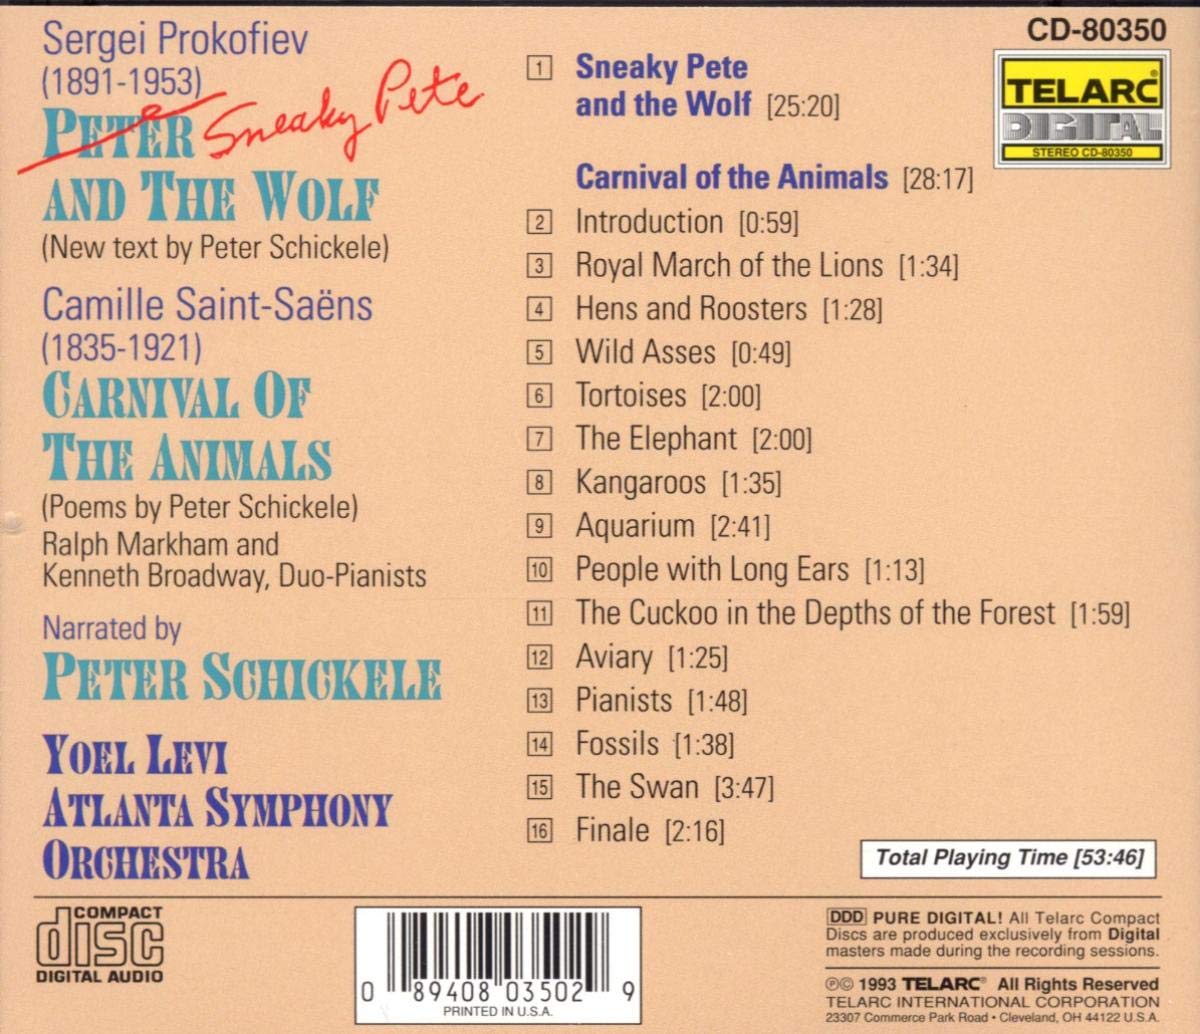 PROKOFIEV: SNEAKY PETE & THE WOLF; SAINT-SAENS: CARNIVAL OF THE ANIMALS - written and narrated by Peter Schickele, Yoel Levi, Atlanta Symphony